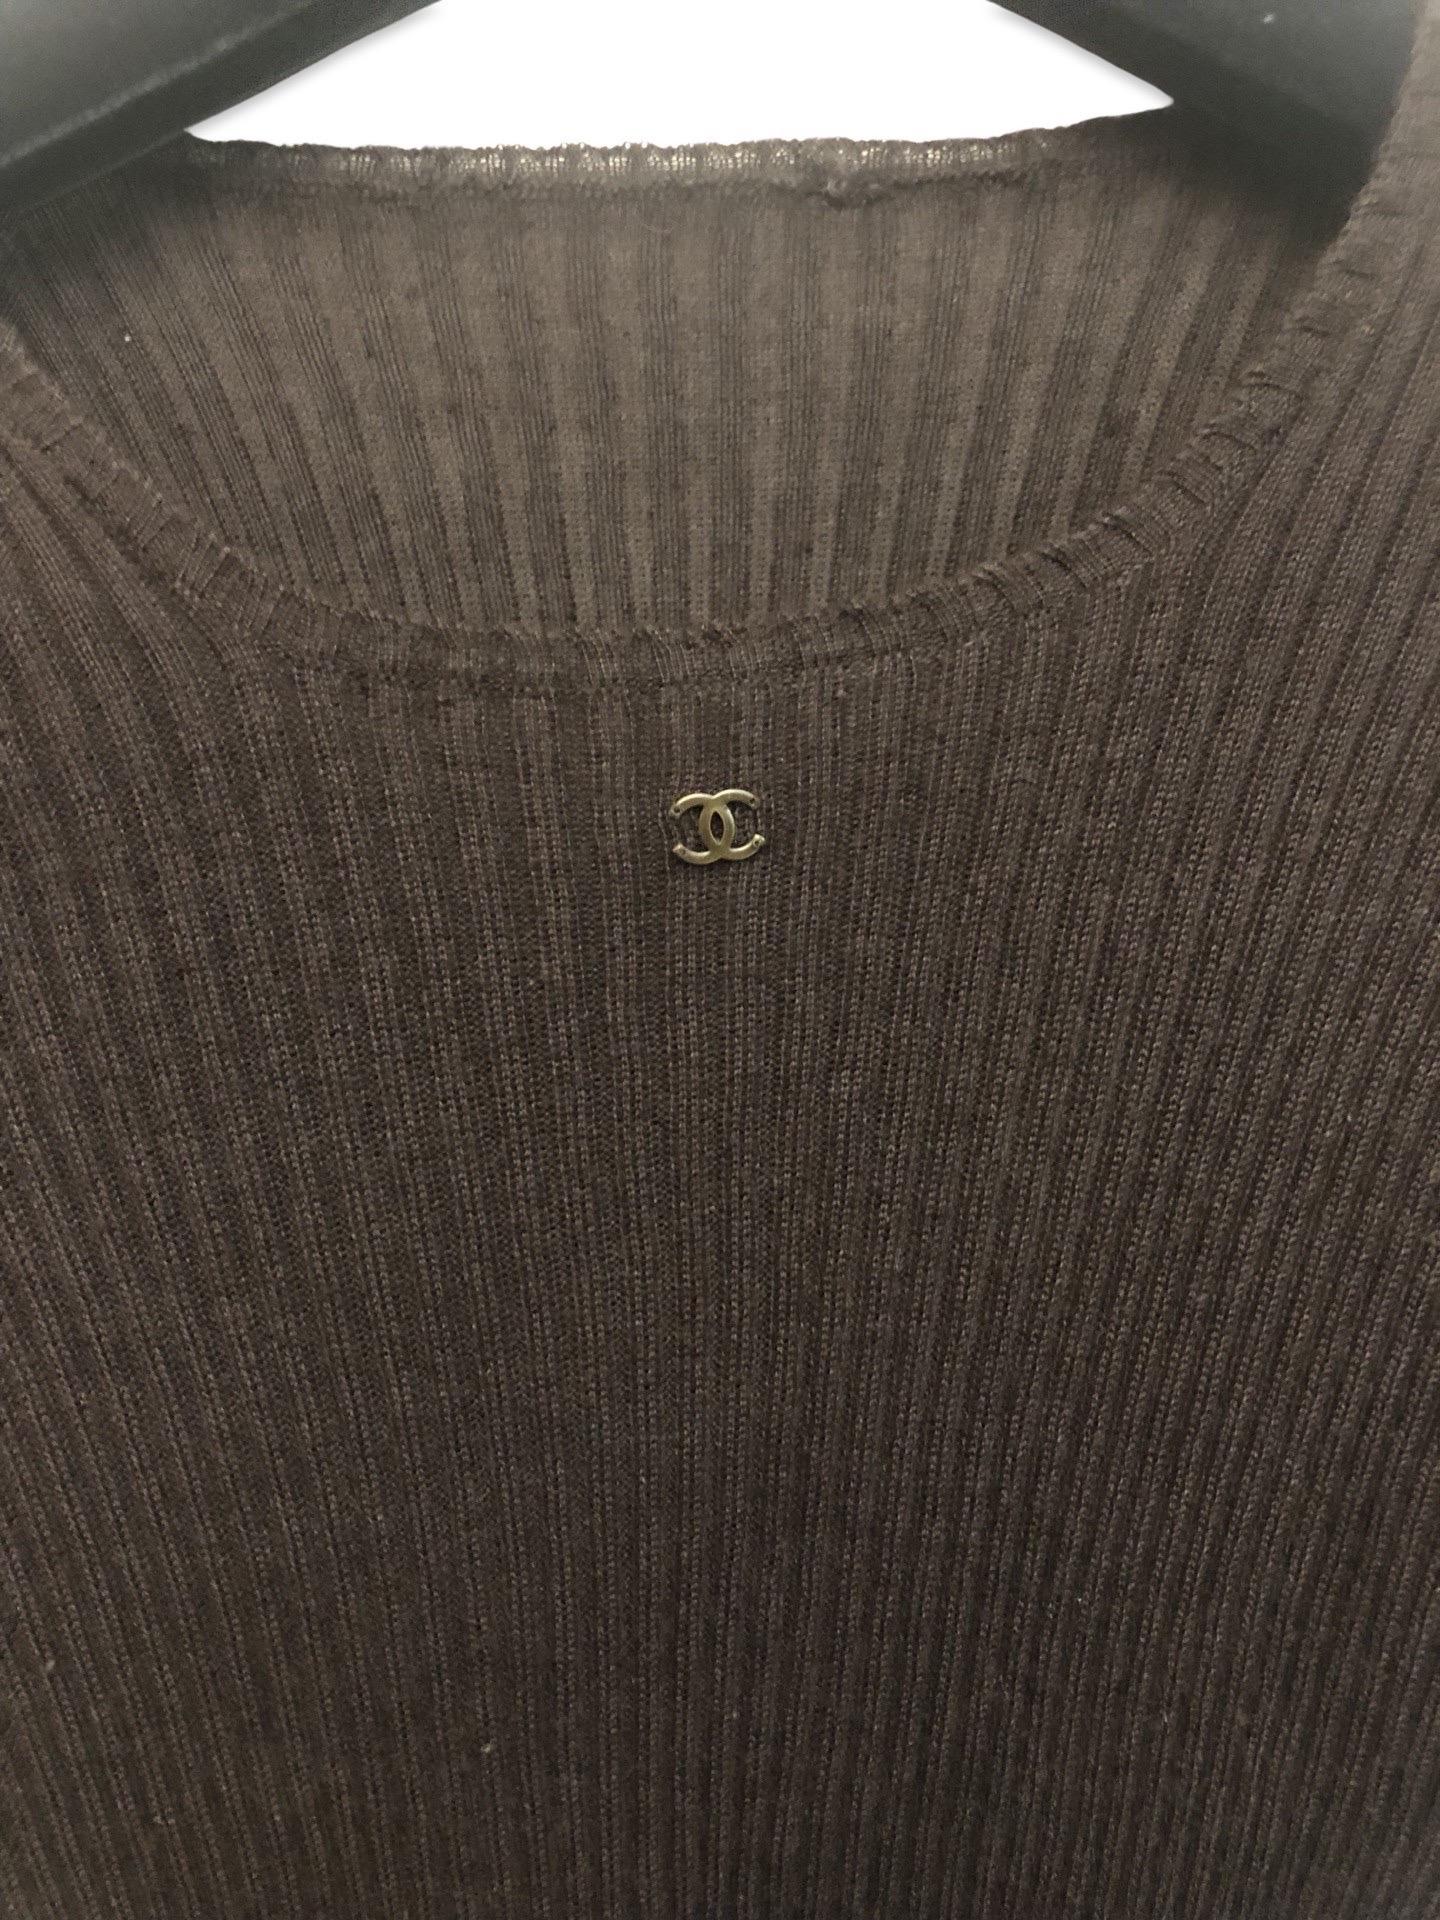 - Chanel cashmere and silk short sleeves top from A/W 1998.

- CC hardware logo. 

- There is no tag but it fits like a size 40.

